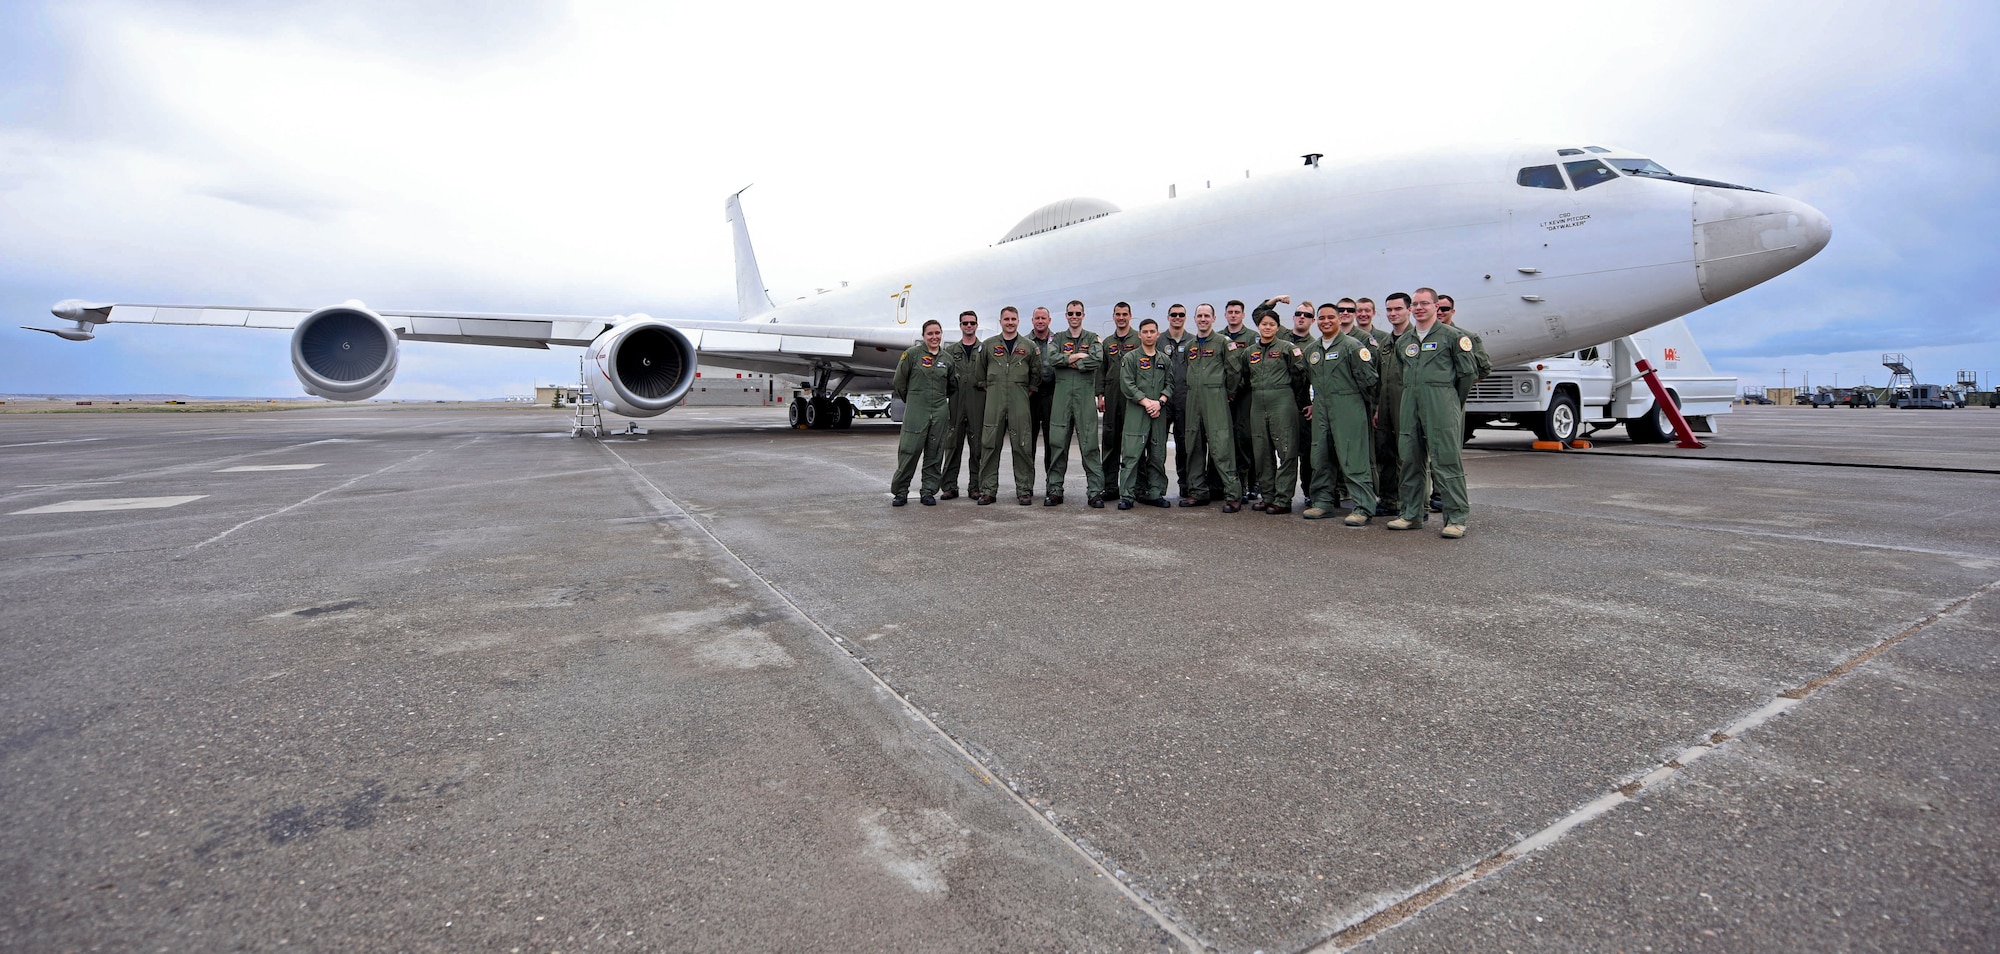 The joint Air Force and Navy crew of an E-6B Mercury Airborne Launch Control System aircraft, stationed with the 625th Strategic Operations Squadron based out of Offutt Air Force Base, Neb., pose for a picture on the tarmac of the Montana Air National Guard flight line in Great Falls, Mont., April 5, 2016. Col. Jonathan Sorbet took over July 2 as senior materiel leader for a division of the Command, Control, Communications, Intelligence and Networks Directorate at Hanscom Air Force Base, Mass. responsible for acquiring the Family of Advanced Beyond Line-of-Sight Terminals, or FAB-T, used on the E-6B. (U.S. Air Force photo by Airman Collin Schmidt)